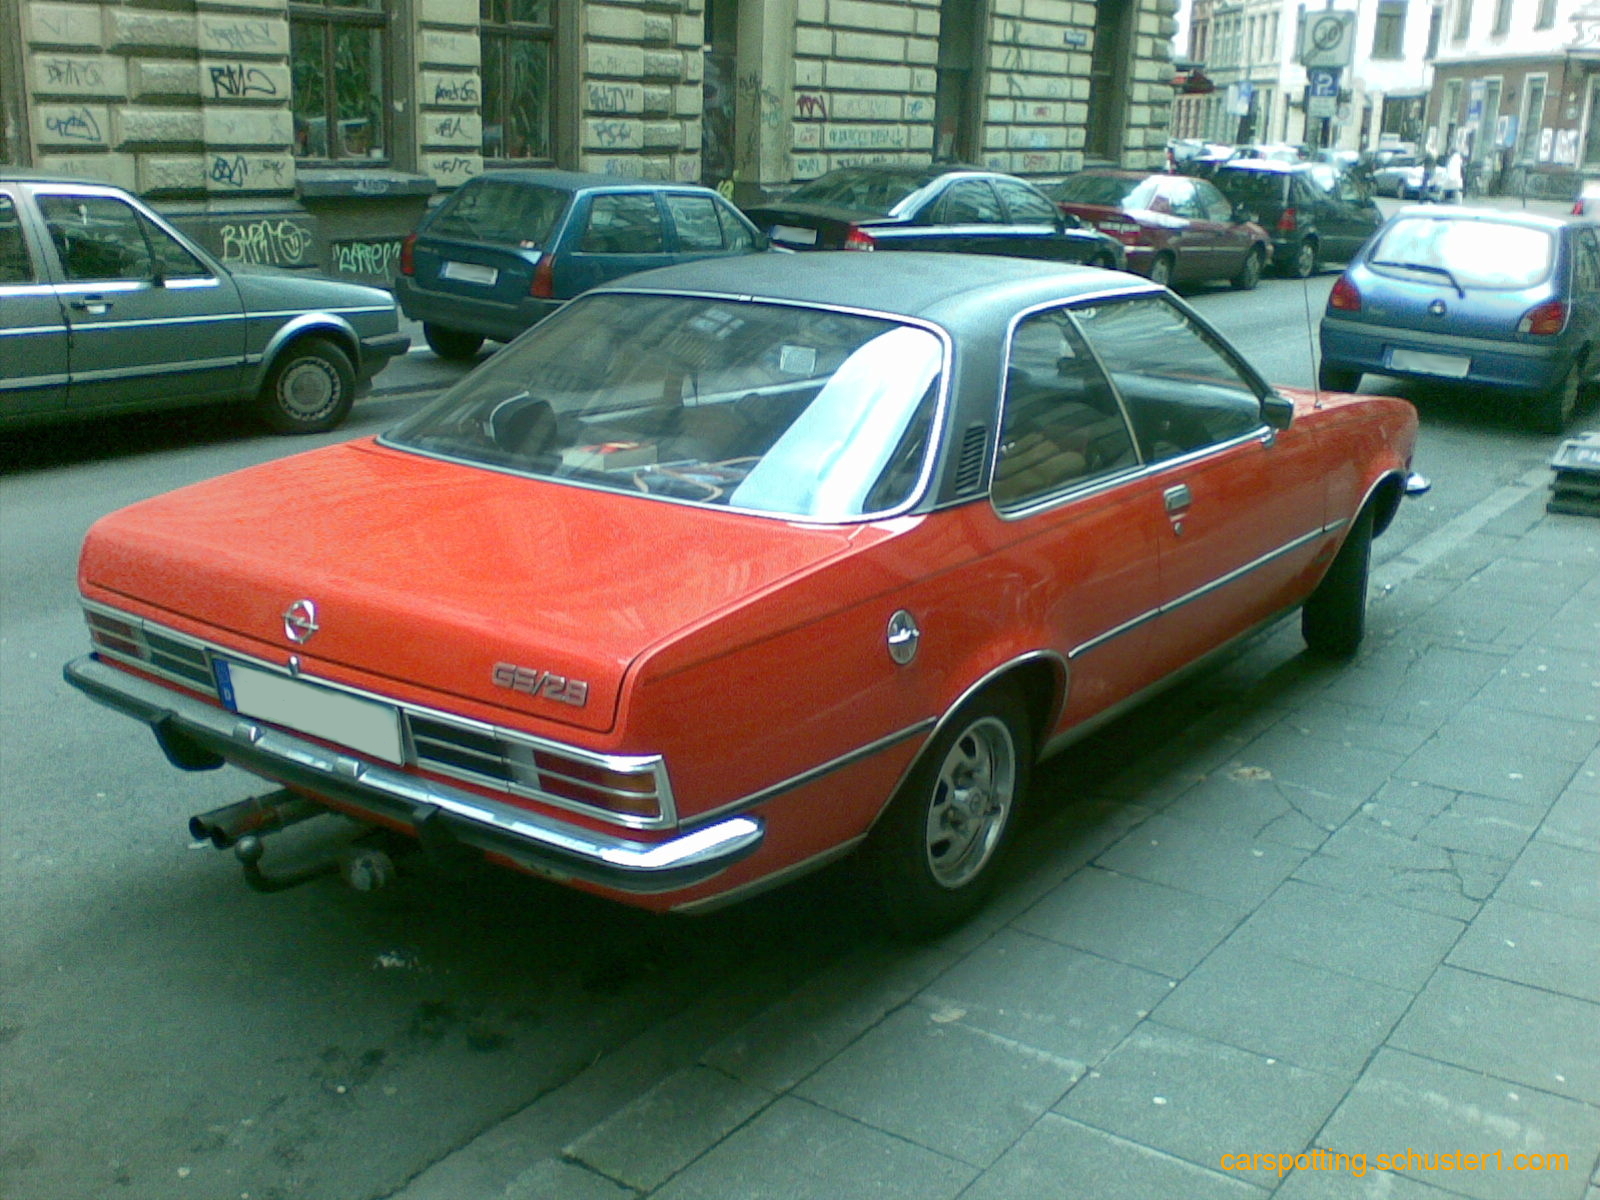 Opel Commodore GS/2.8. Filed in europÃ¤isch,Opel | No responses yet